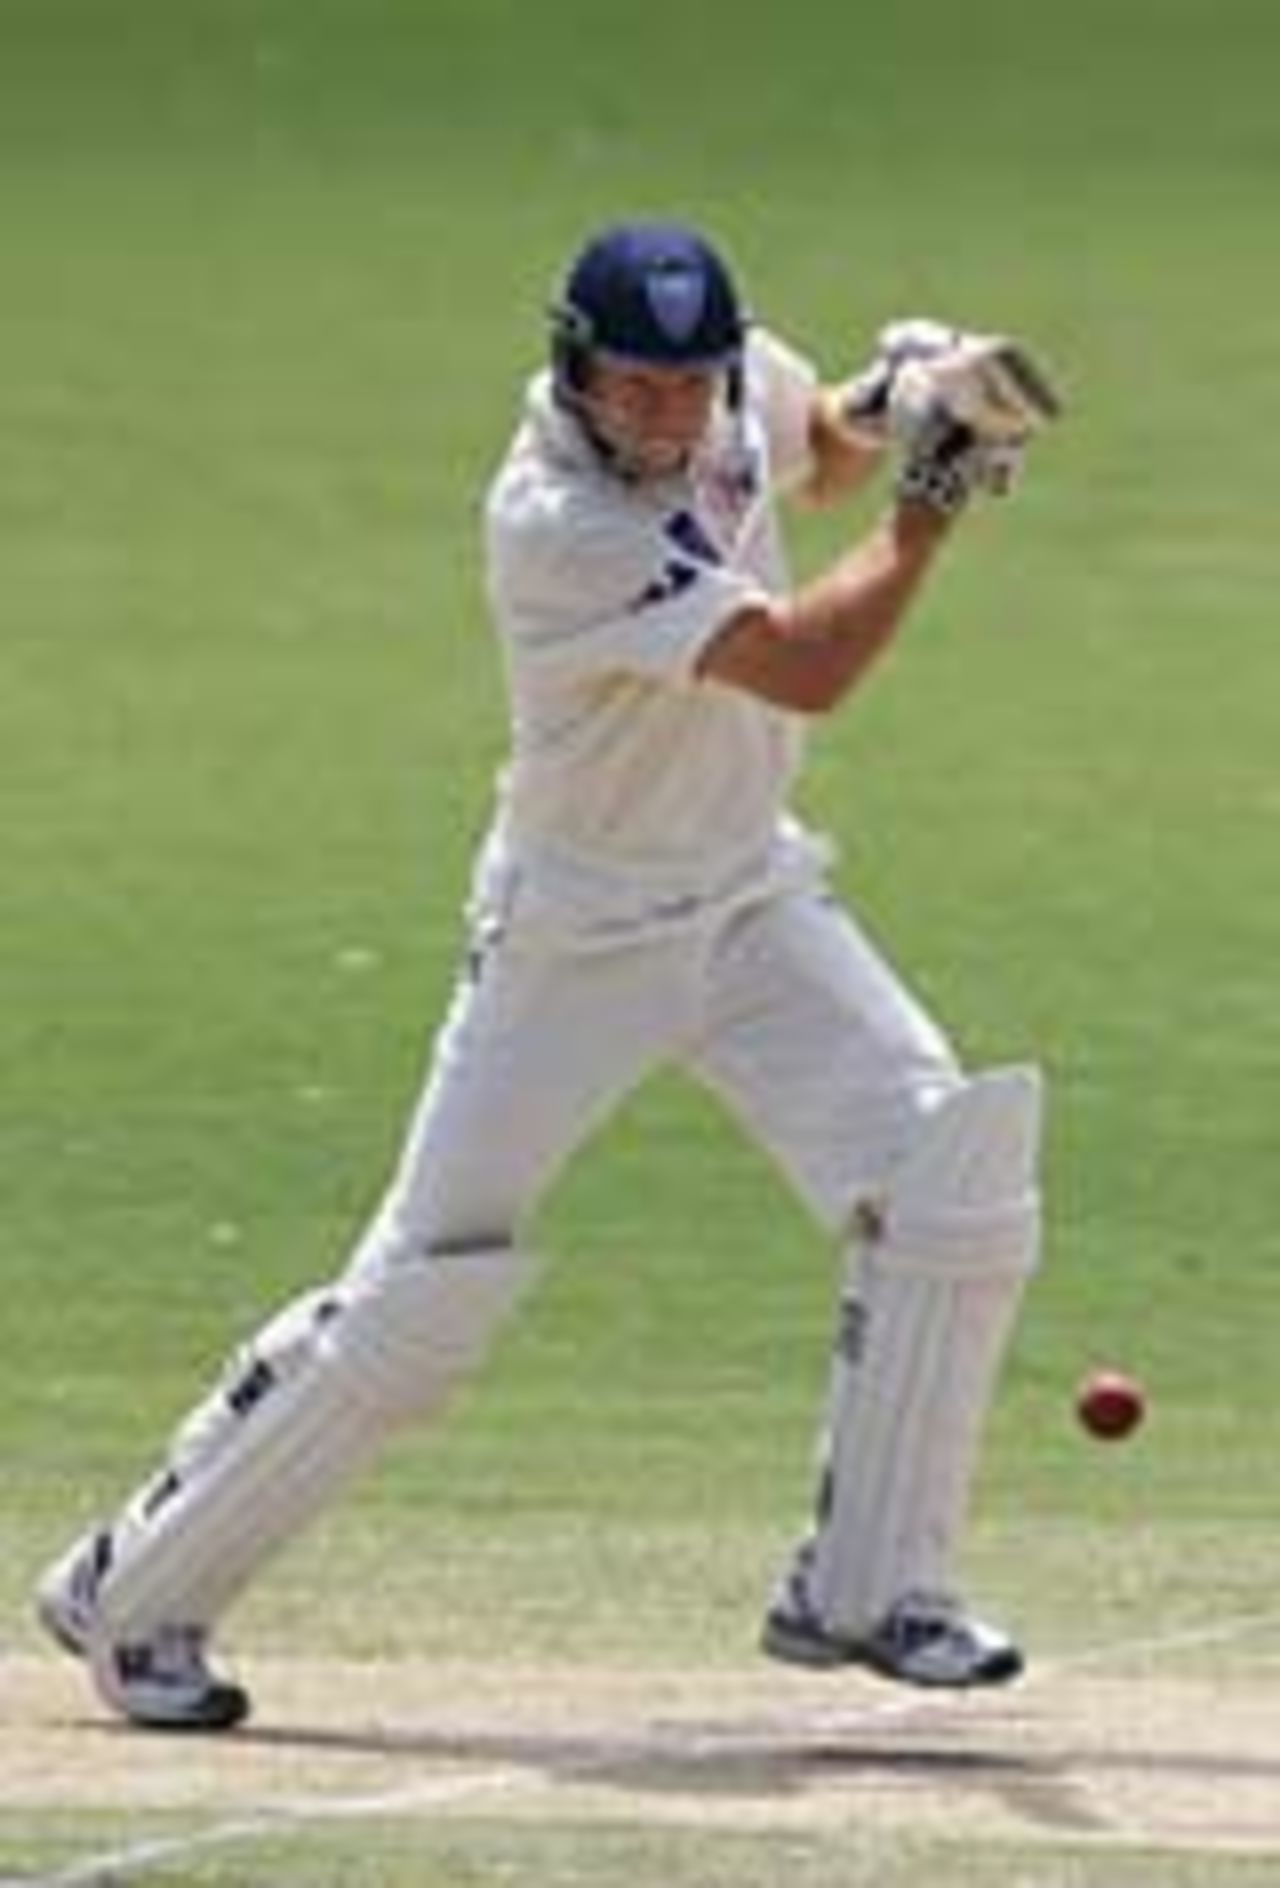 Matthew Phelps drives on the way to his hundred, South Australia v New South Wales, Pura Cup, 3rd day, January 20, 2005